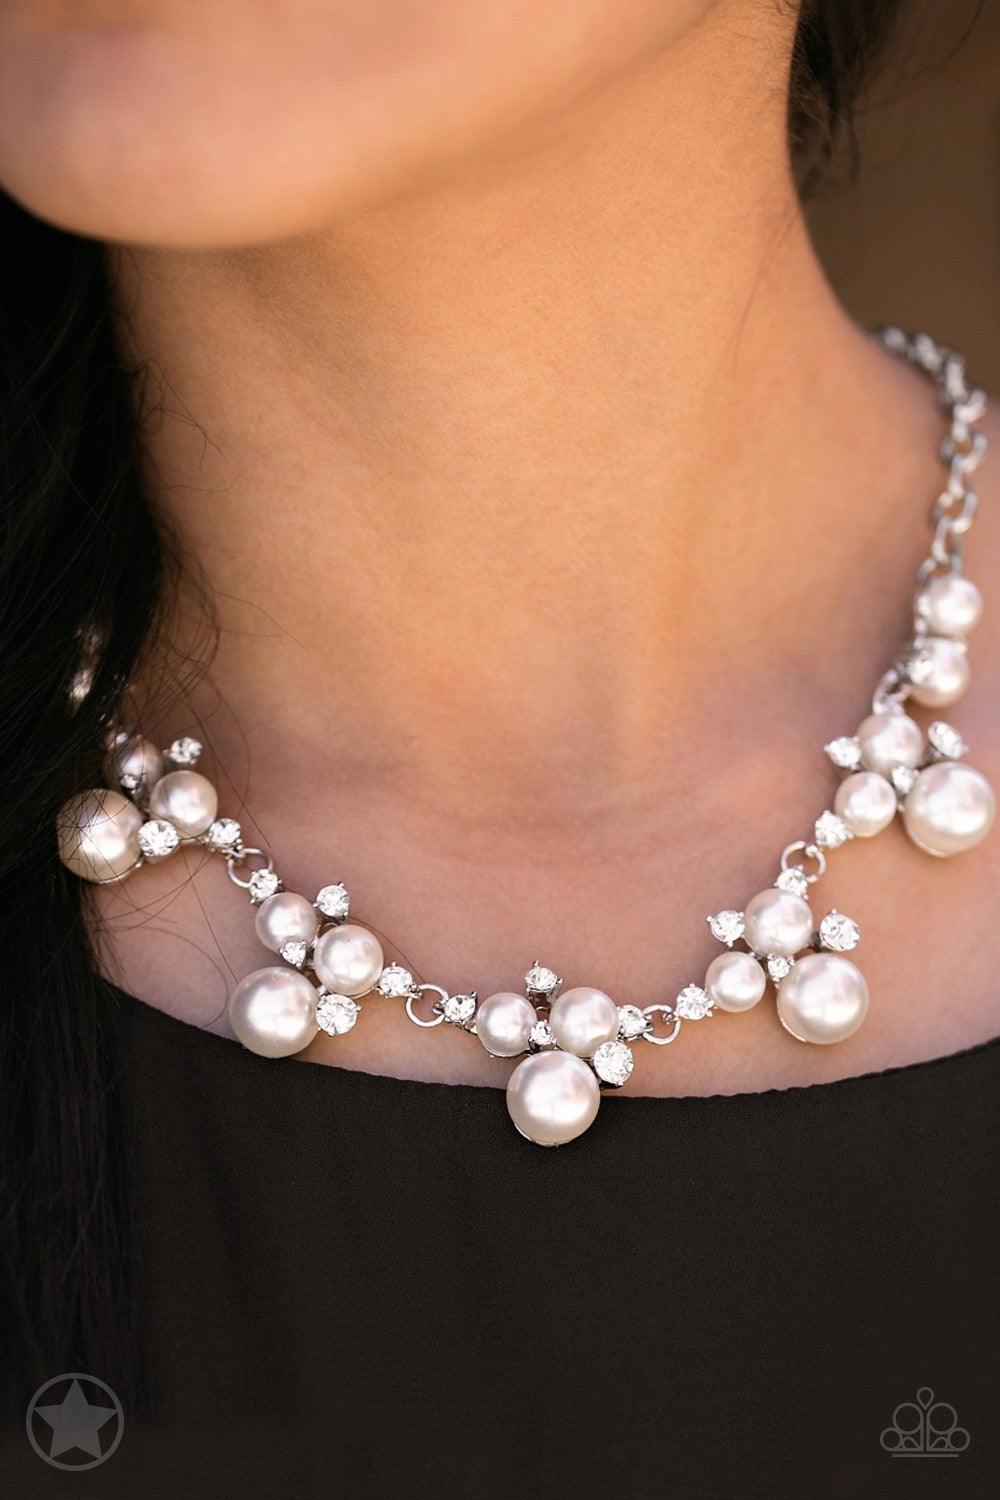 Paparazzi Accessories Toast To Perfection - White Clusters of pearls and dazzling white rhinestones join below the collar, creating refined frames. Infused with a glistening silver chain, the sections of luminescent frames trickle along the neck in a time